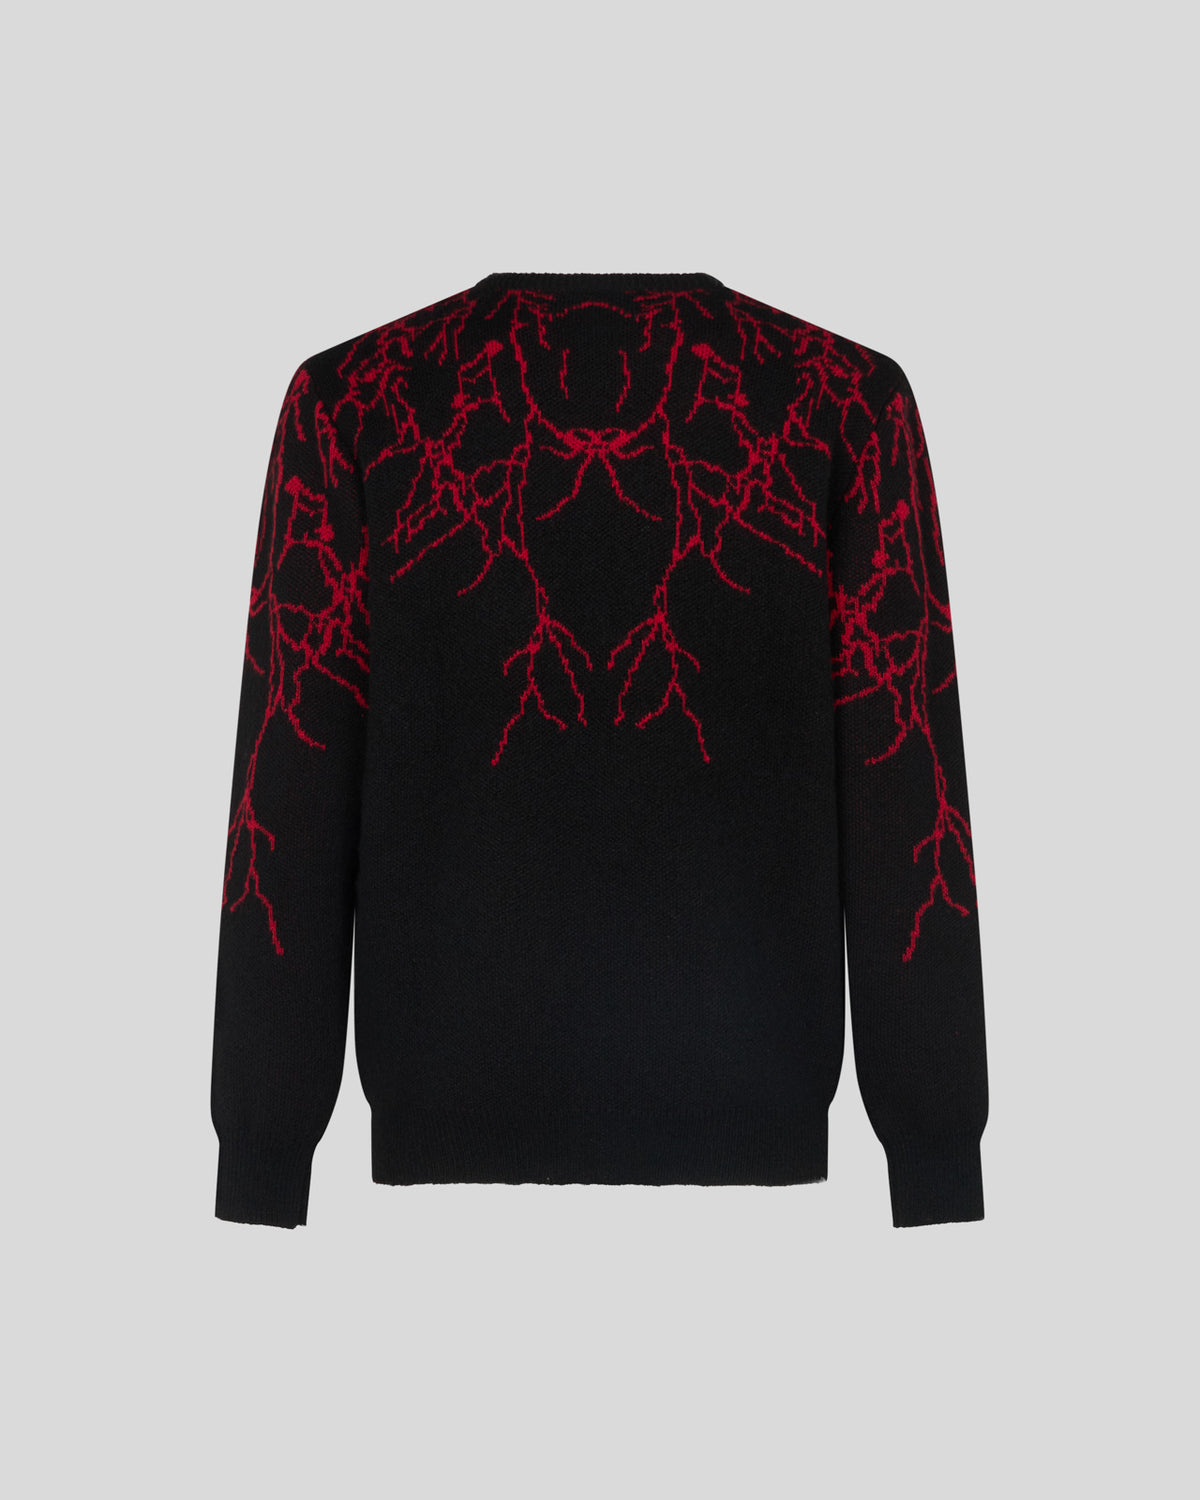 PHOBIA BLACK JUMPER WITH RED LIGHTNING